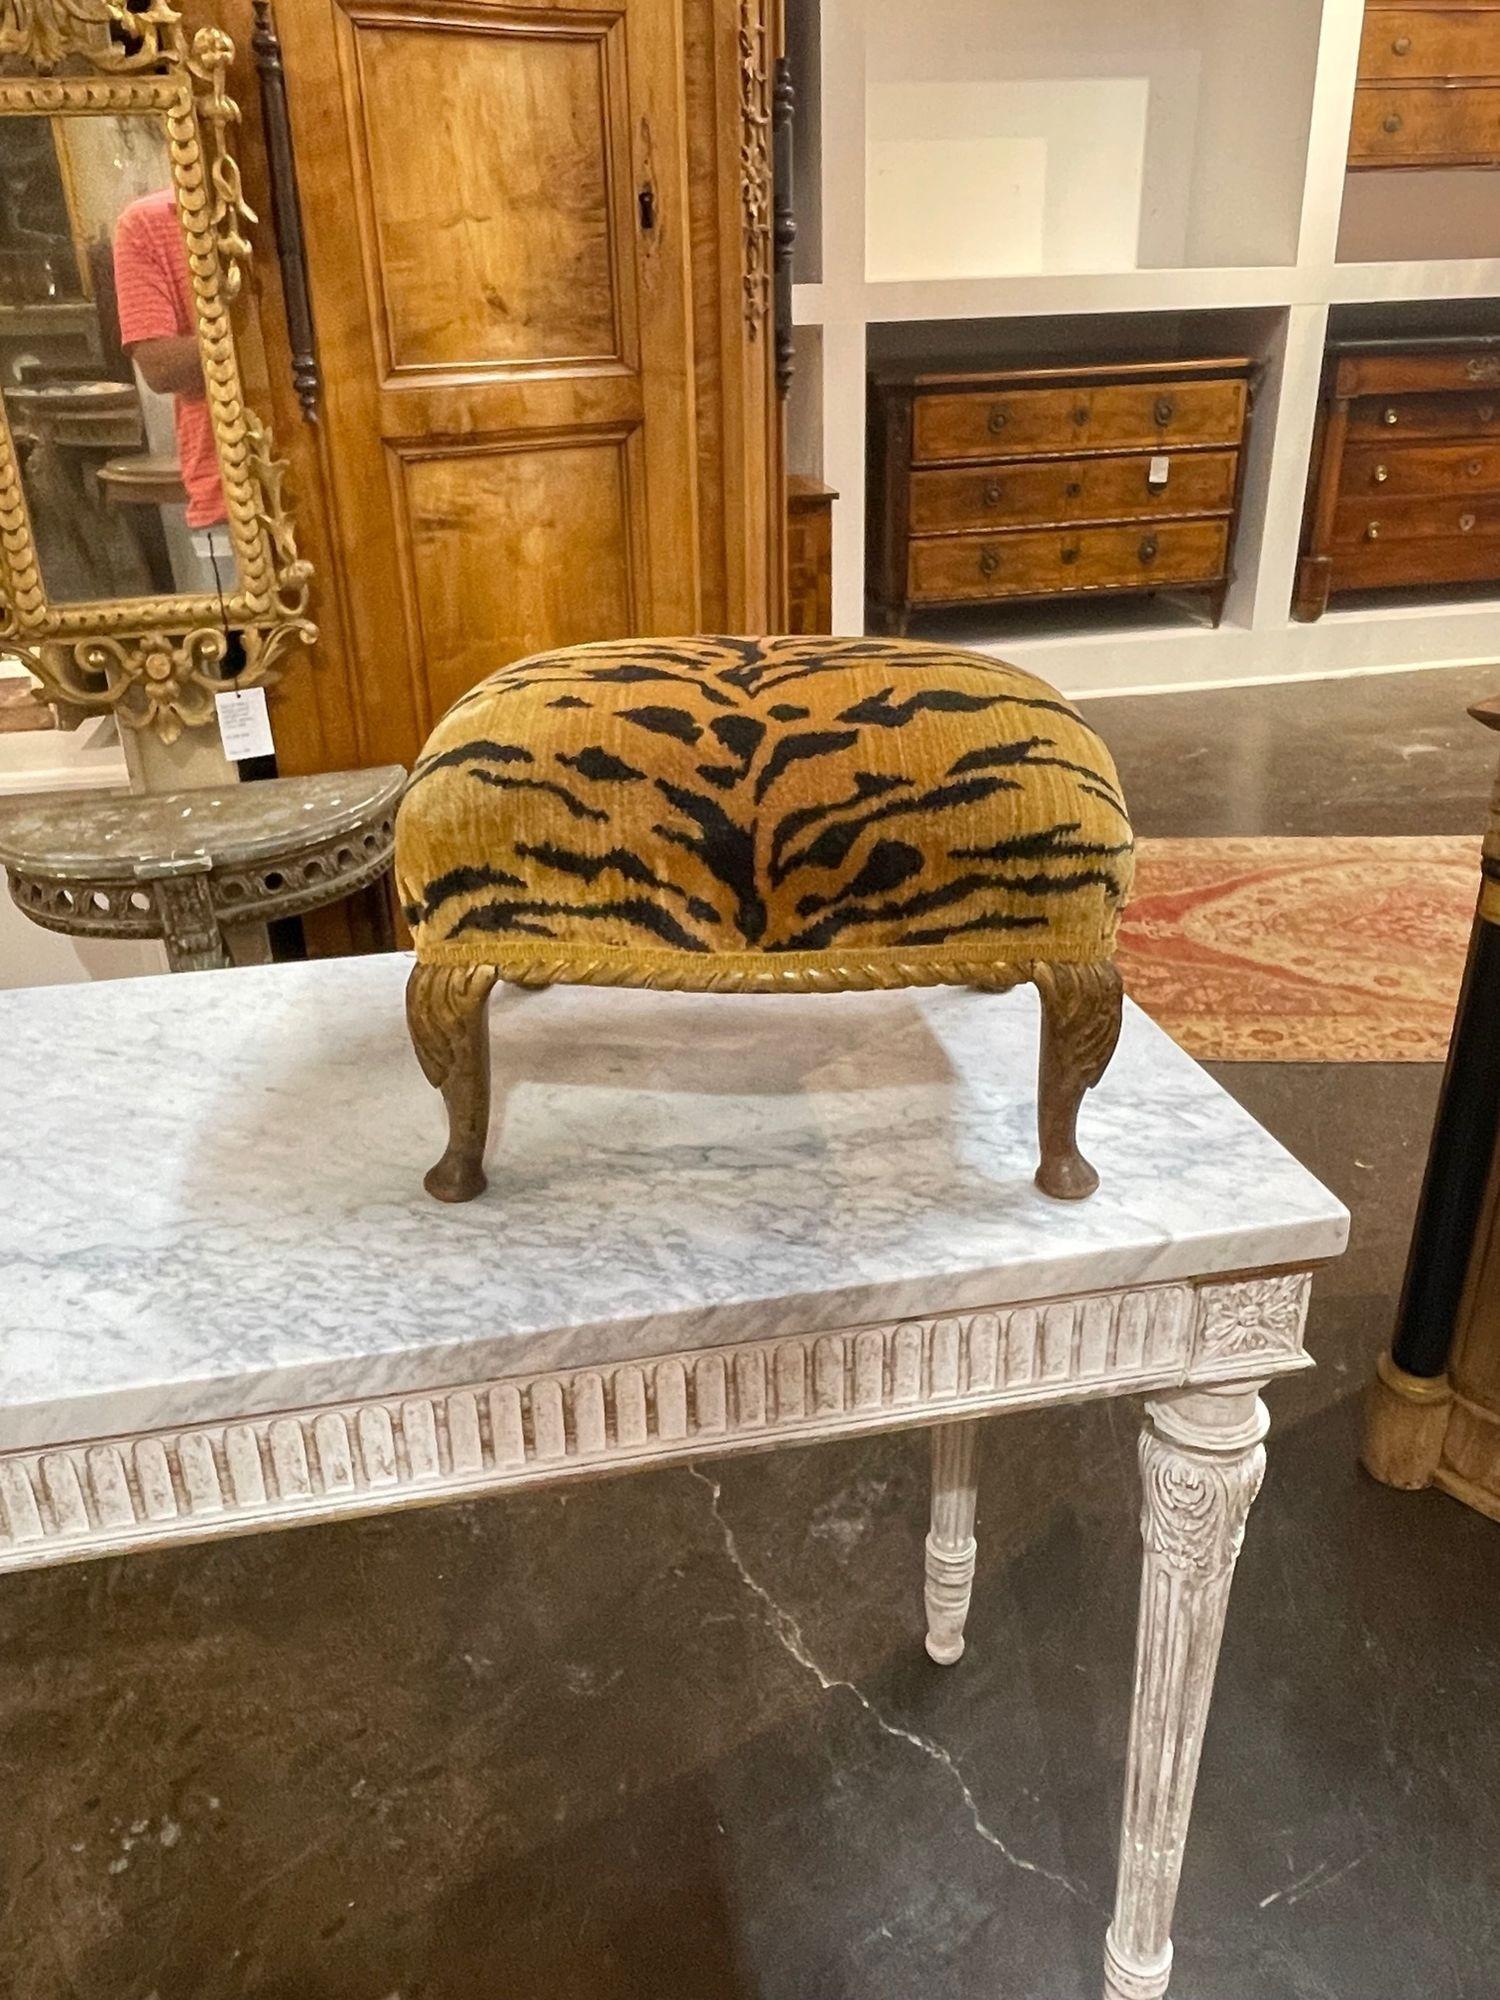 Stylish 19th century carved and gilt wood stool with Scalamandre tiger upholstery. The piece has nice carvings as well. Makes a fabulous accessory!